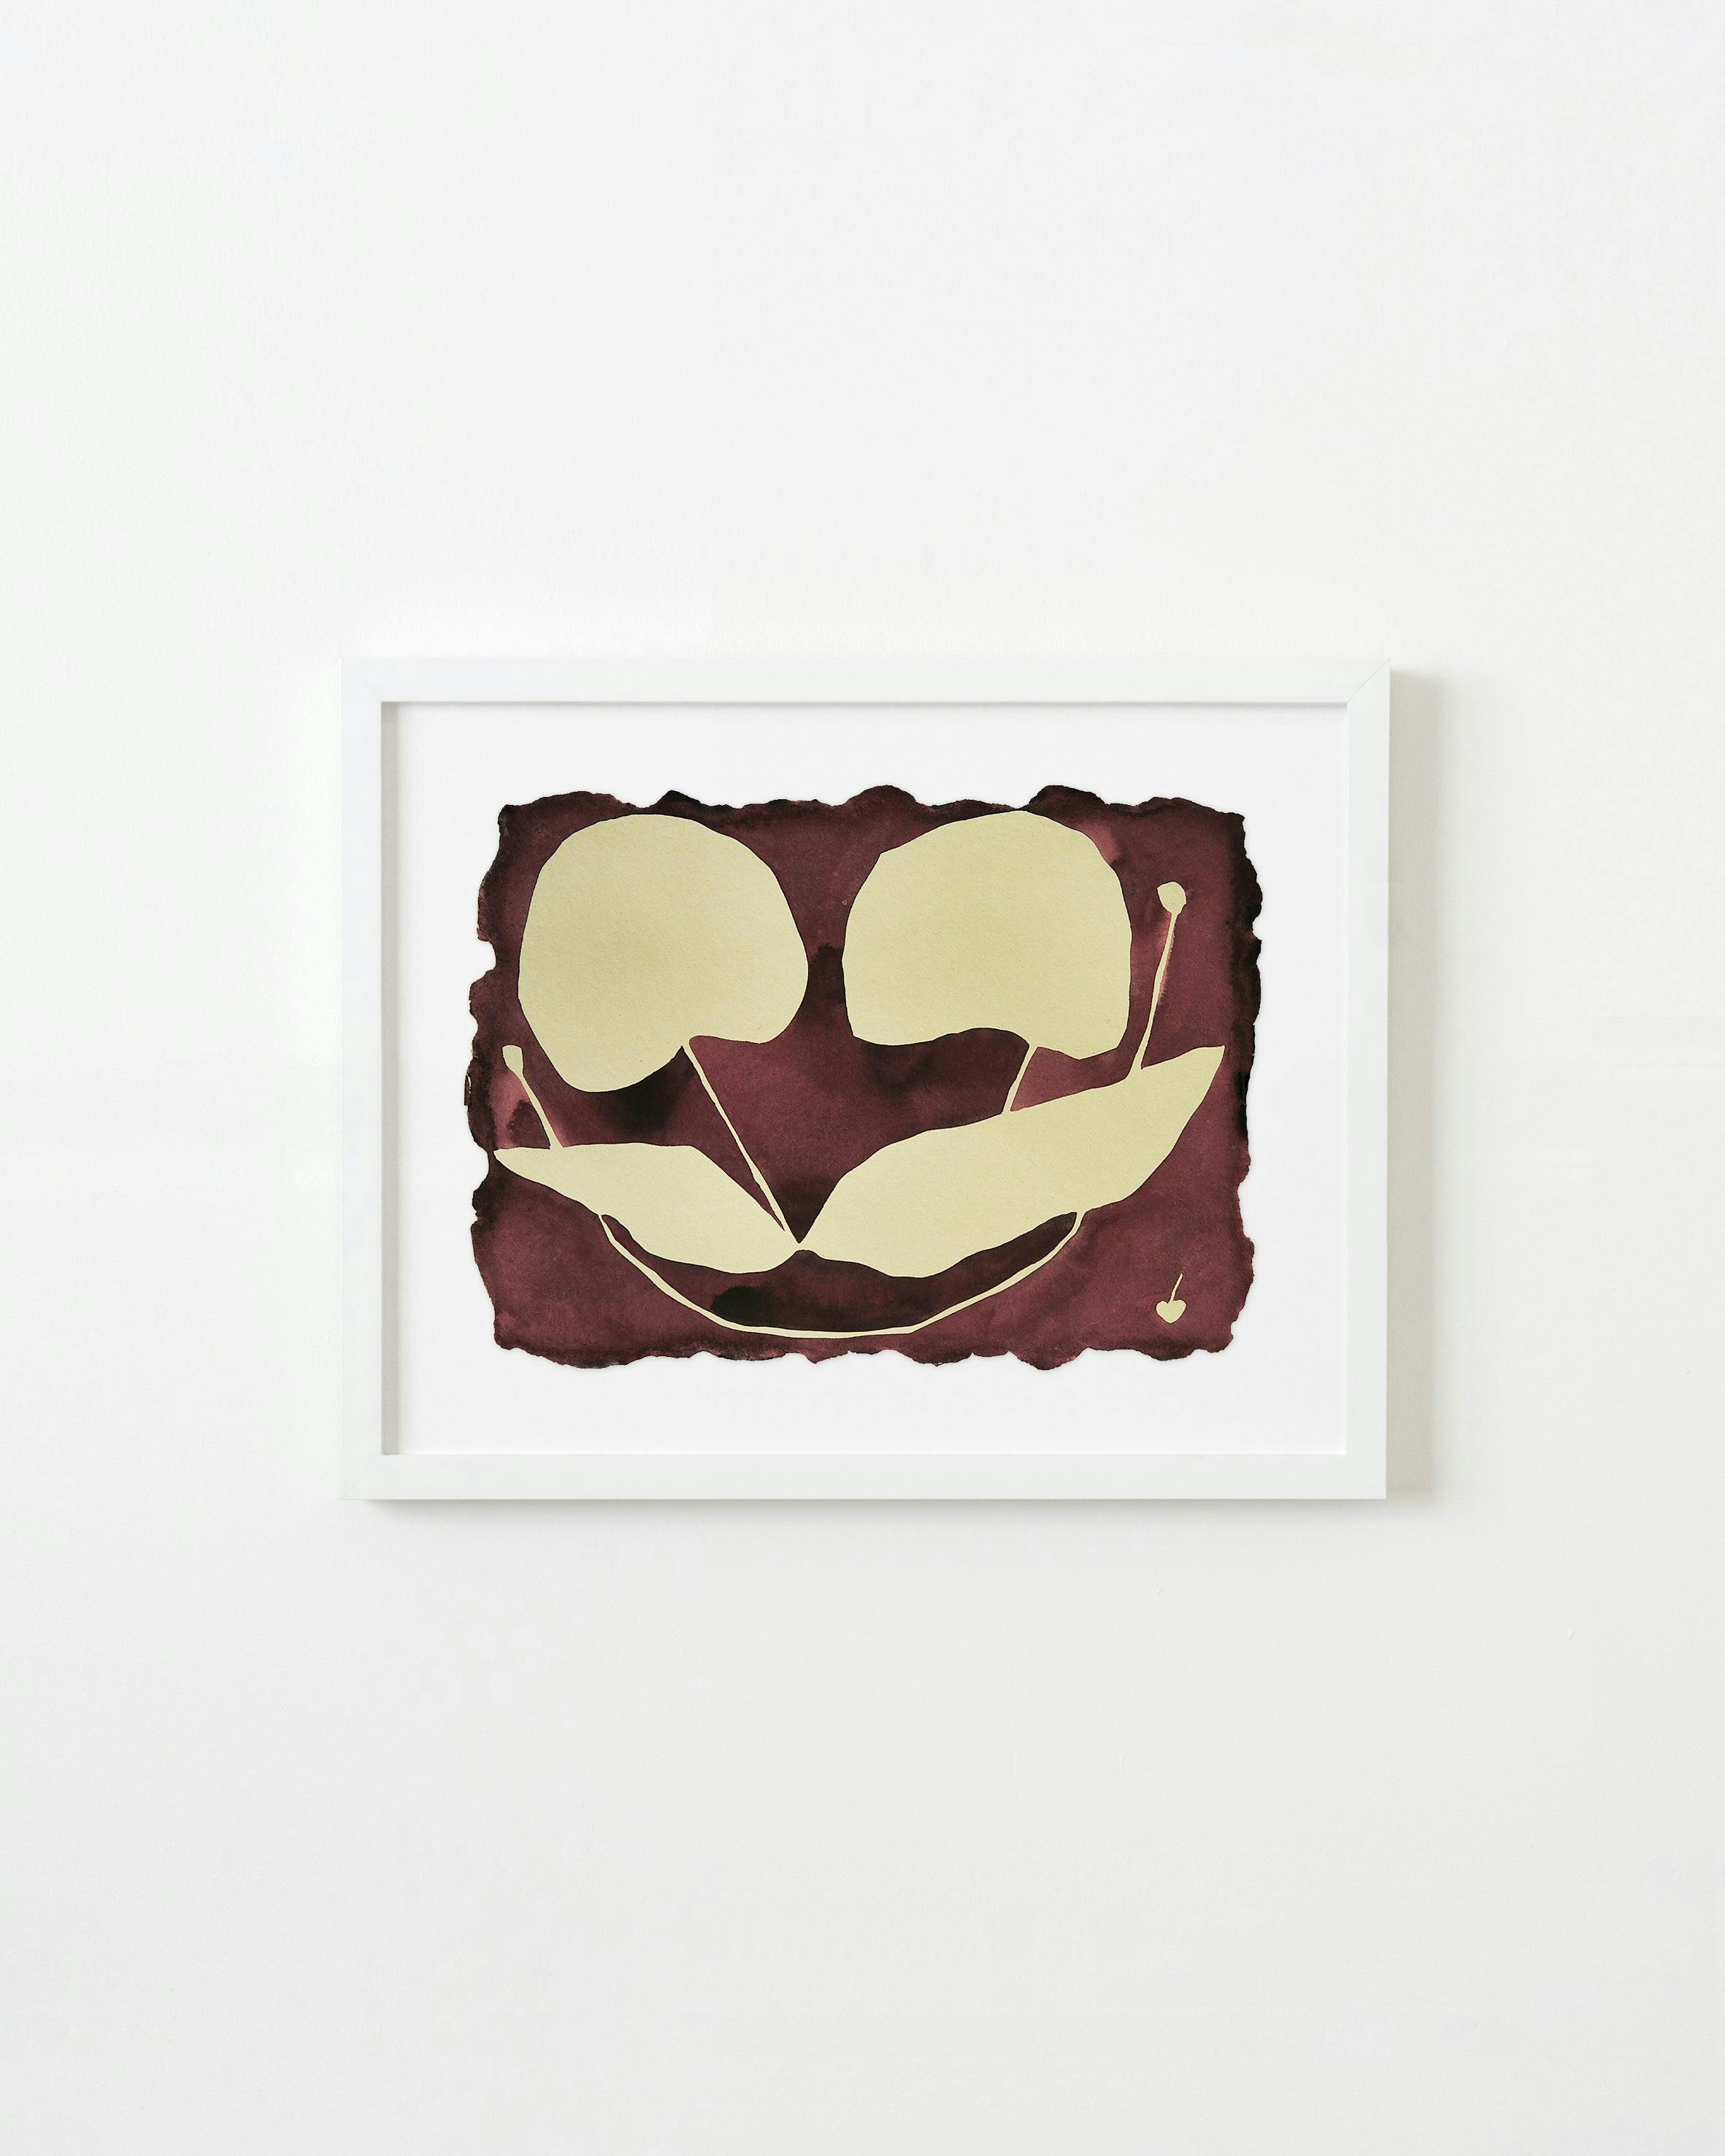 Painting by Kate Roebuck titled "Lil Cherry Smile".